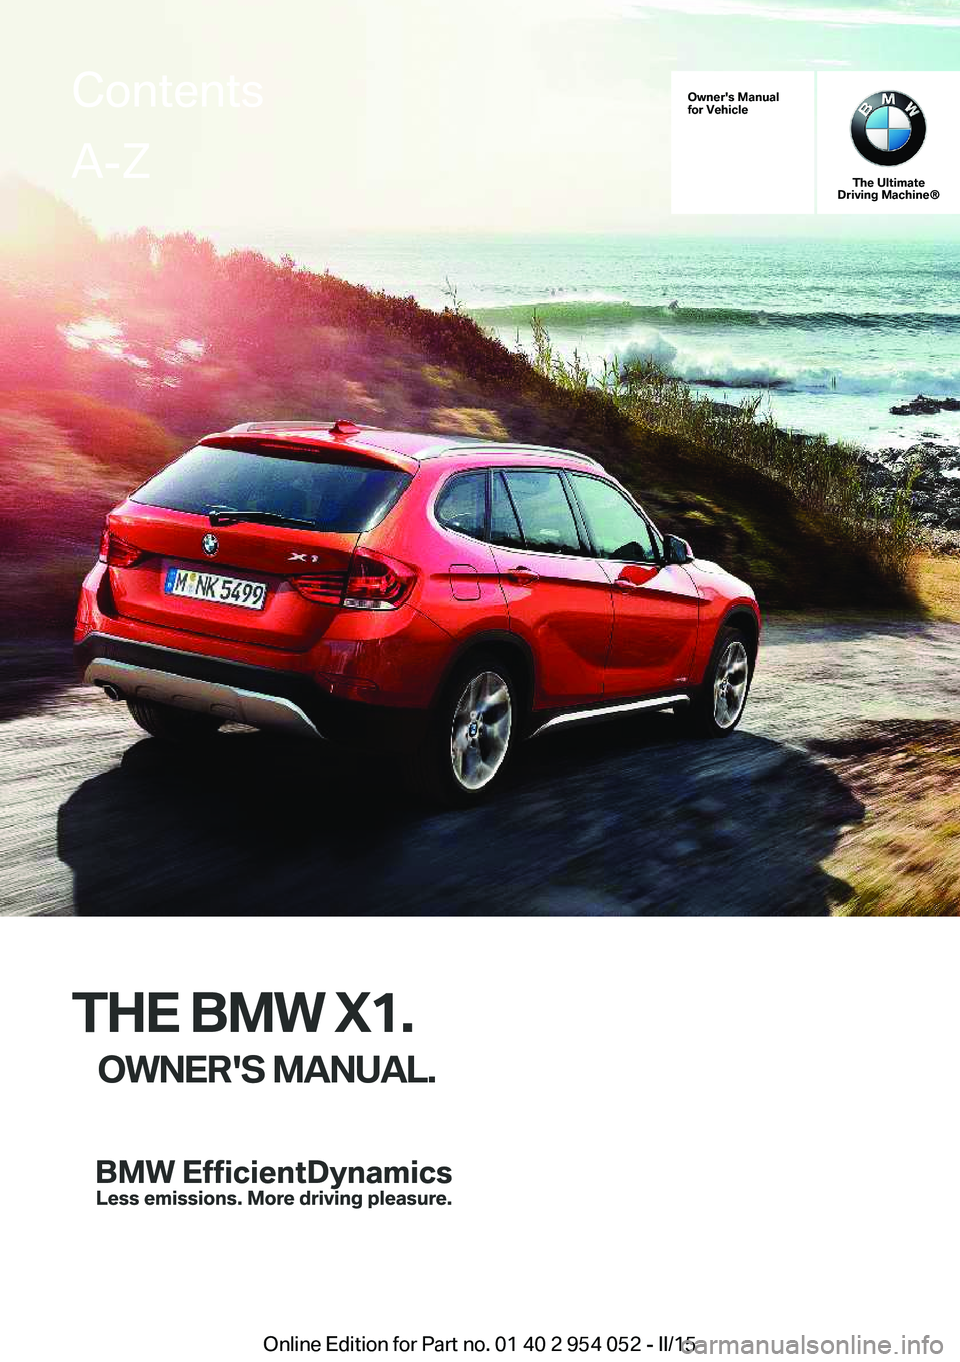 BMW X1 SDRIVE28I 2015  Owners Manual Owner's Manual
for Vehicle
The Ultimate
Driving Machine®
THE BMW X1.
OWNER'S MANUAL.
ContentsA-Z
Online Edition for Part no. 01 40 2 954 052 - II/15   